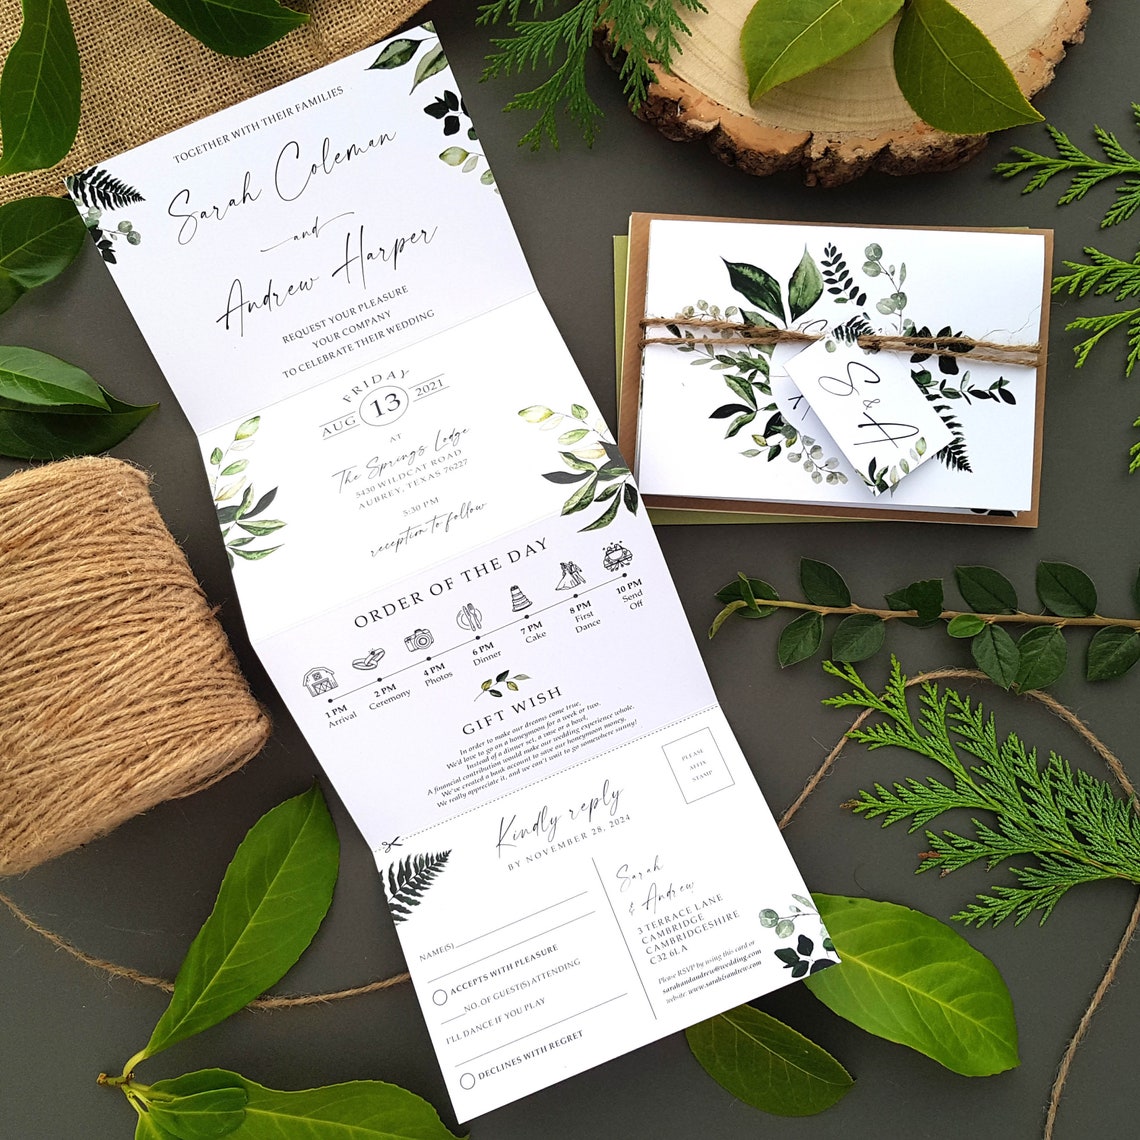 Leafy wedding invitation set with an array of greenery with a personalised tag, rustic twine and a choice of envelopes. Leafy wreath wedding invitations with iniitals